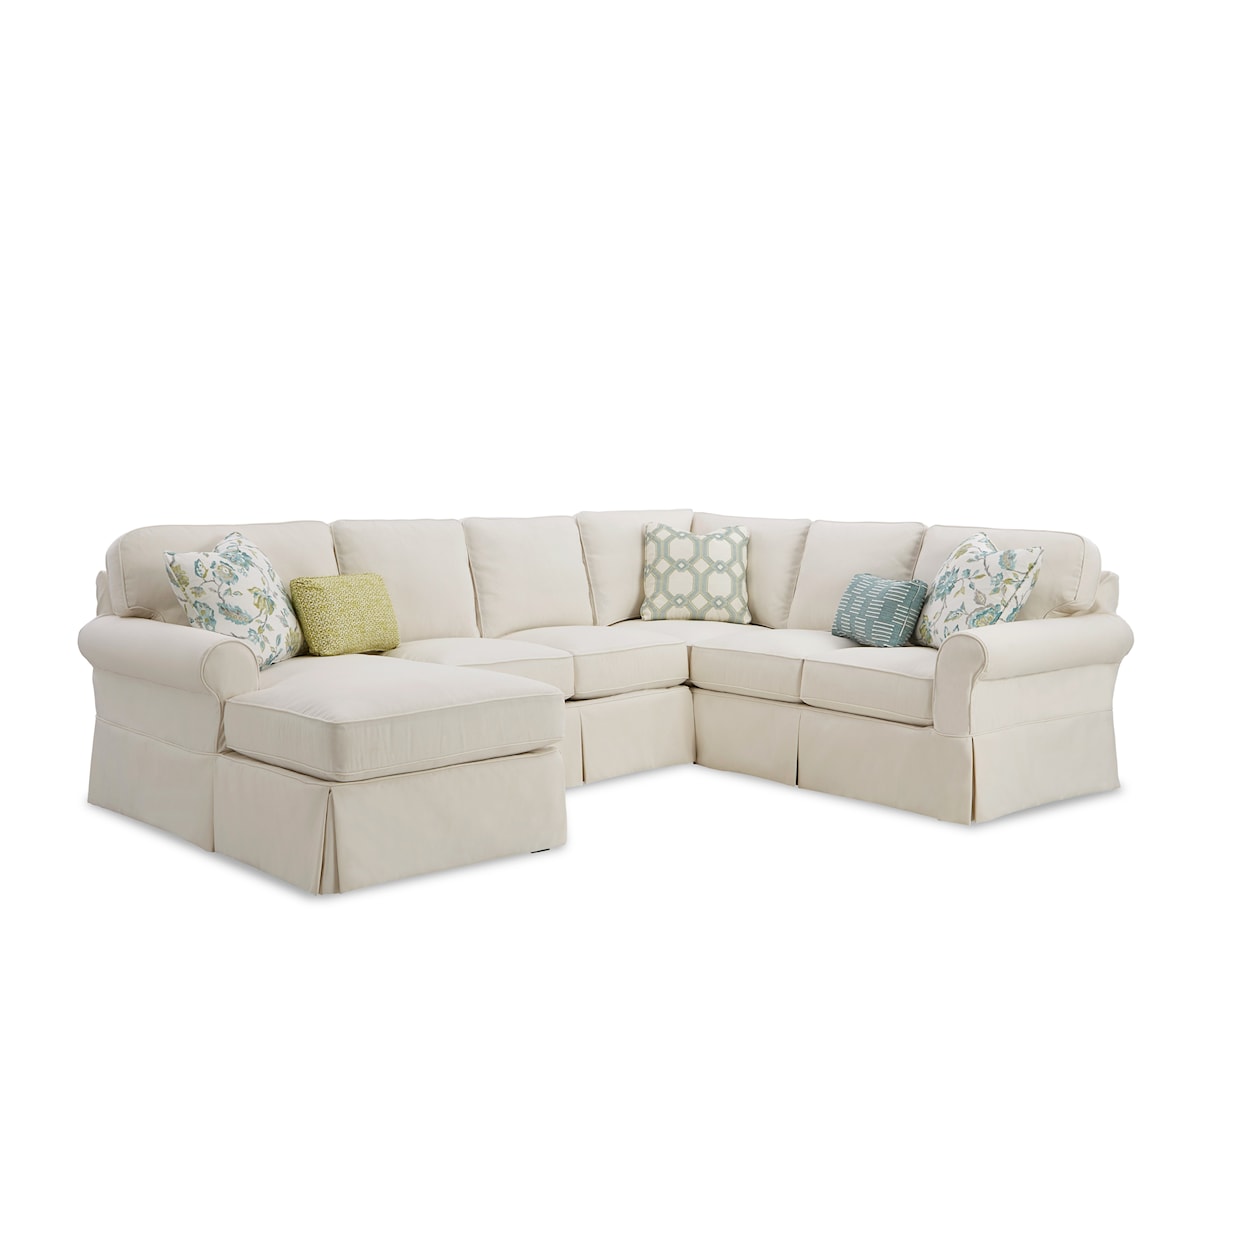 Craftmaster 917450BD 3-Pc Slipcover Sectional Sofa w/ LAF Chaise